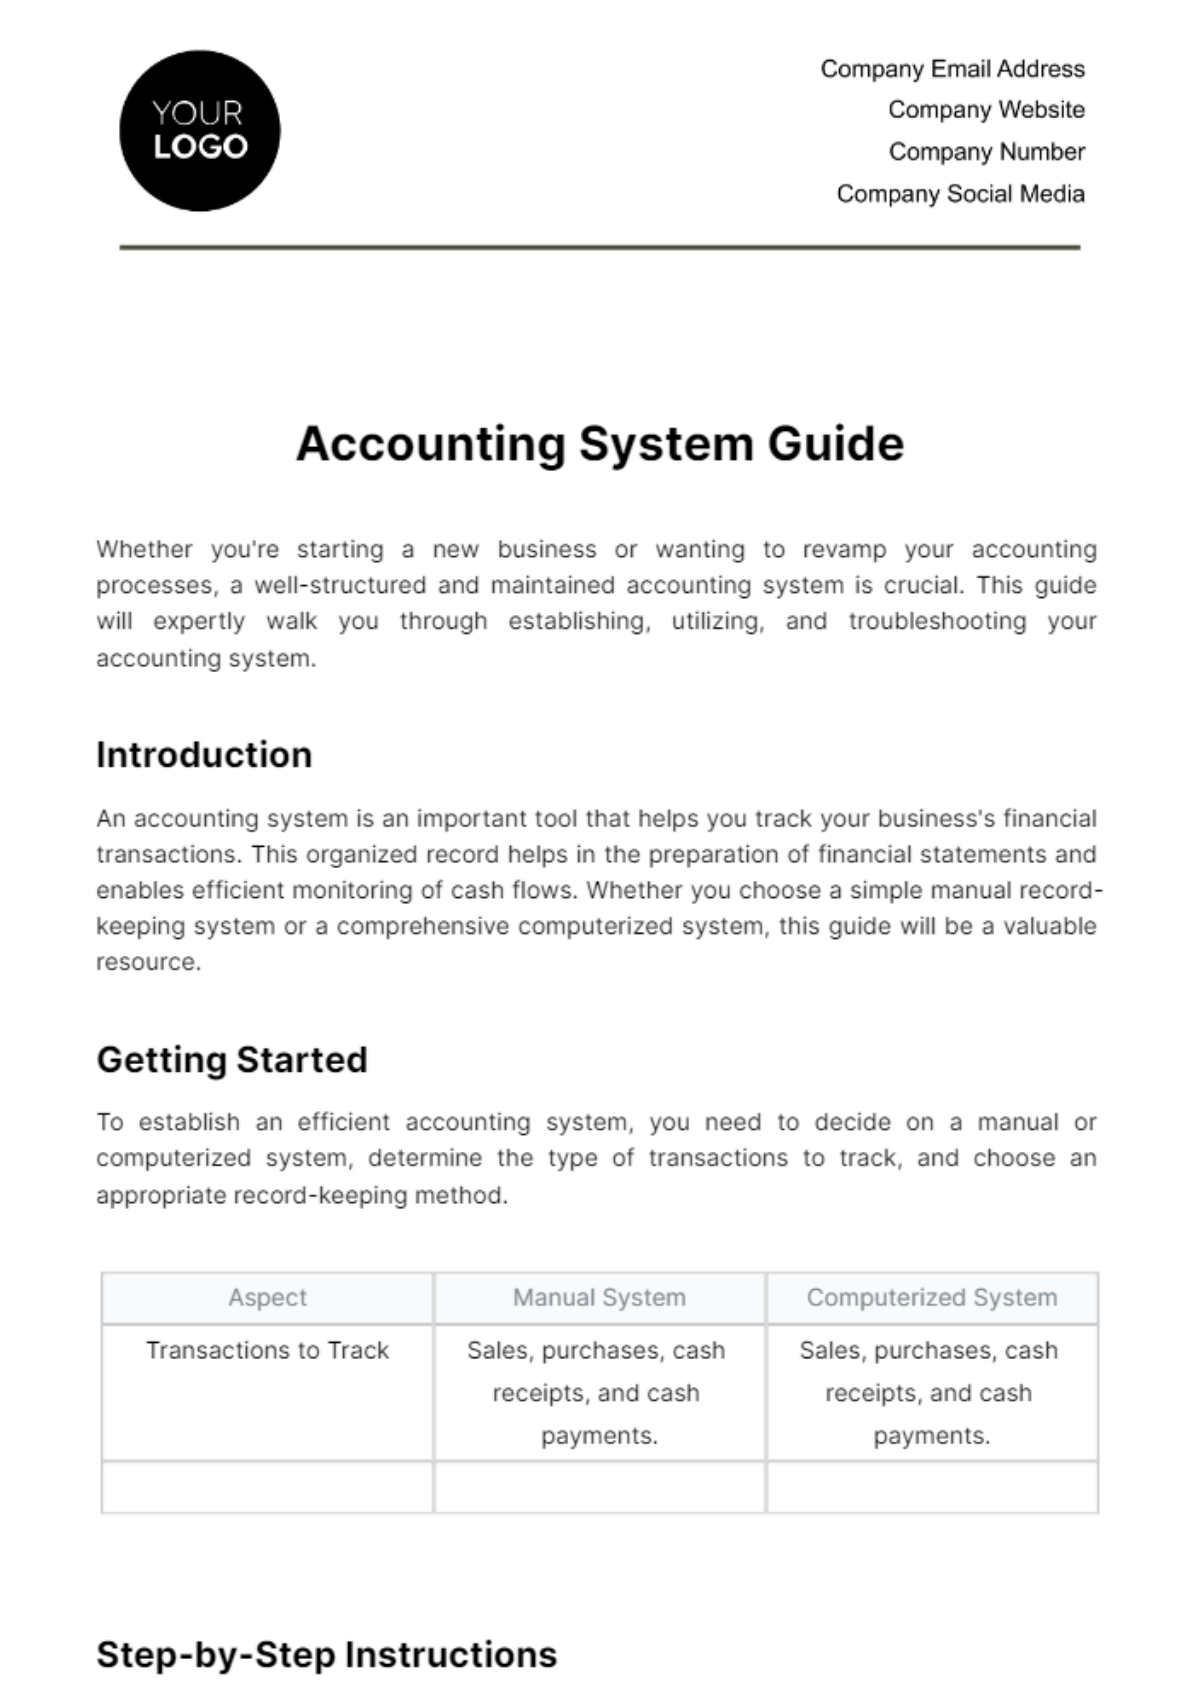 Free Accounting System Guide Template